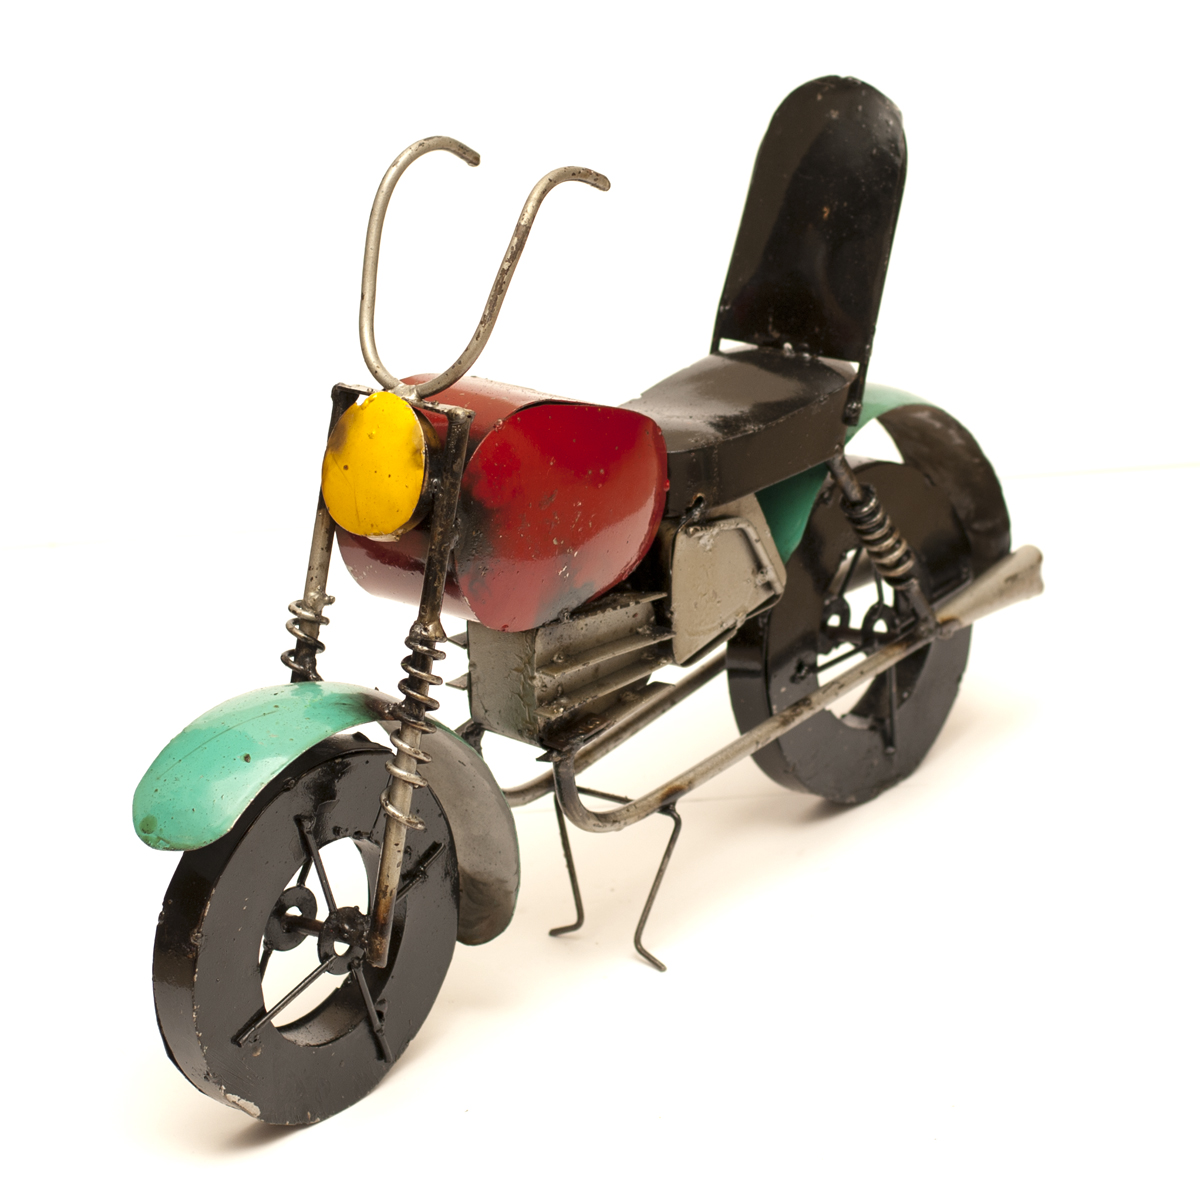 10461 Motorcycle Figurine, Multi Color - Small